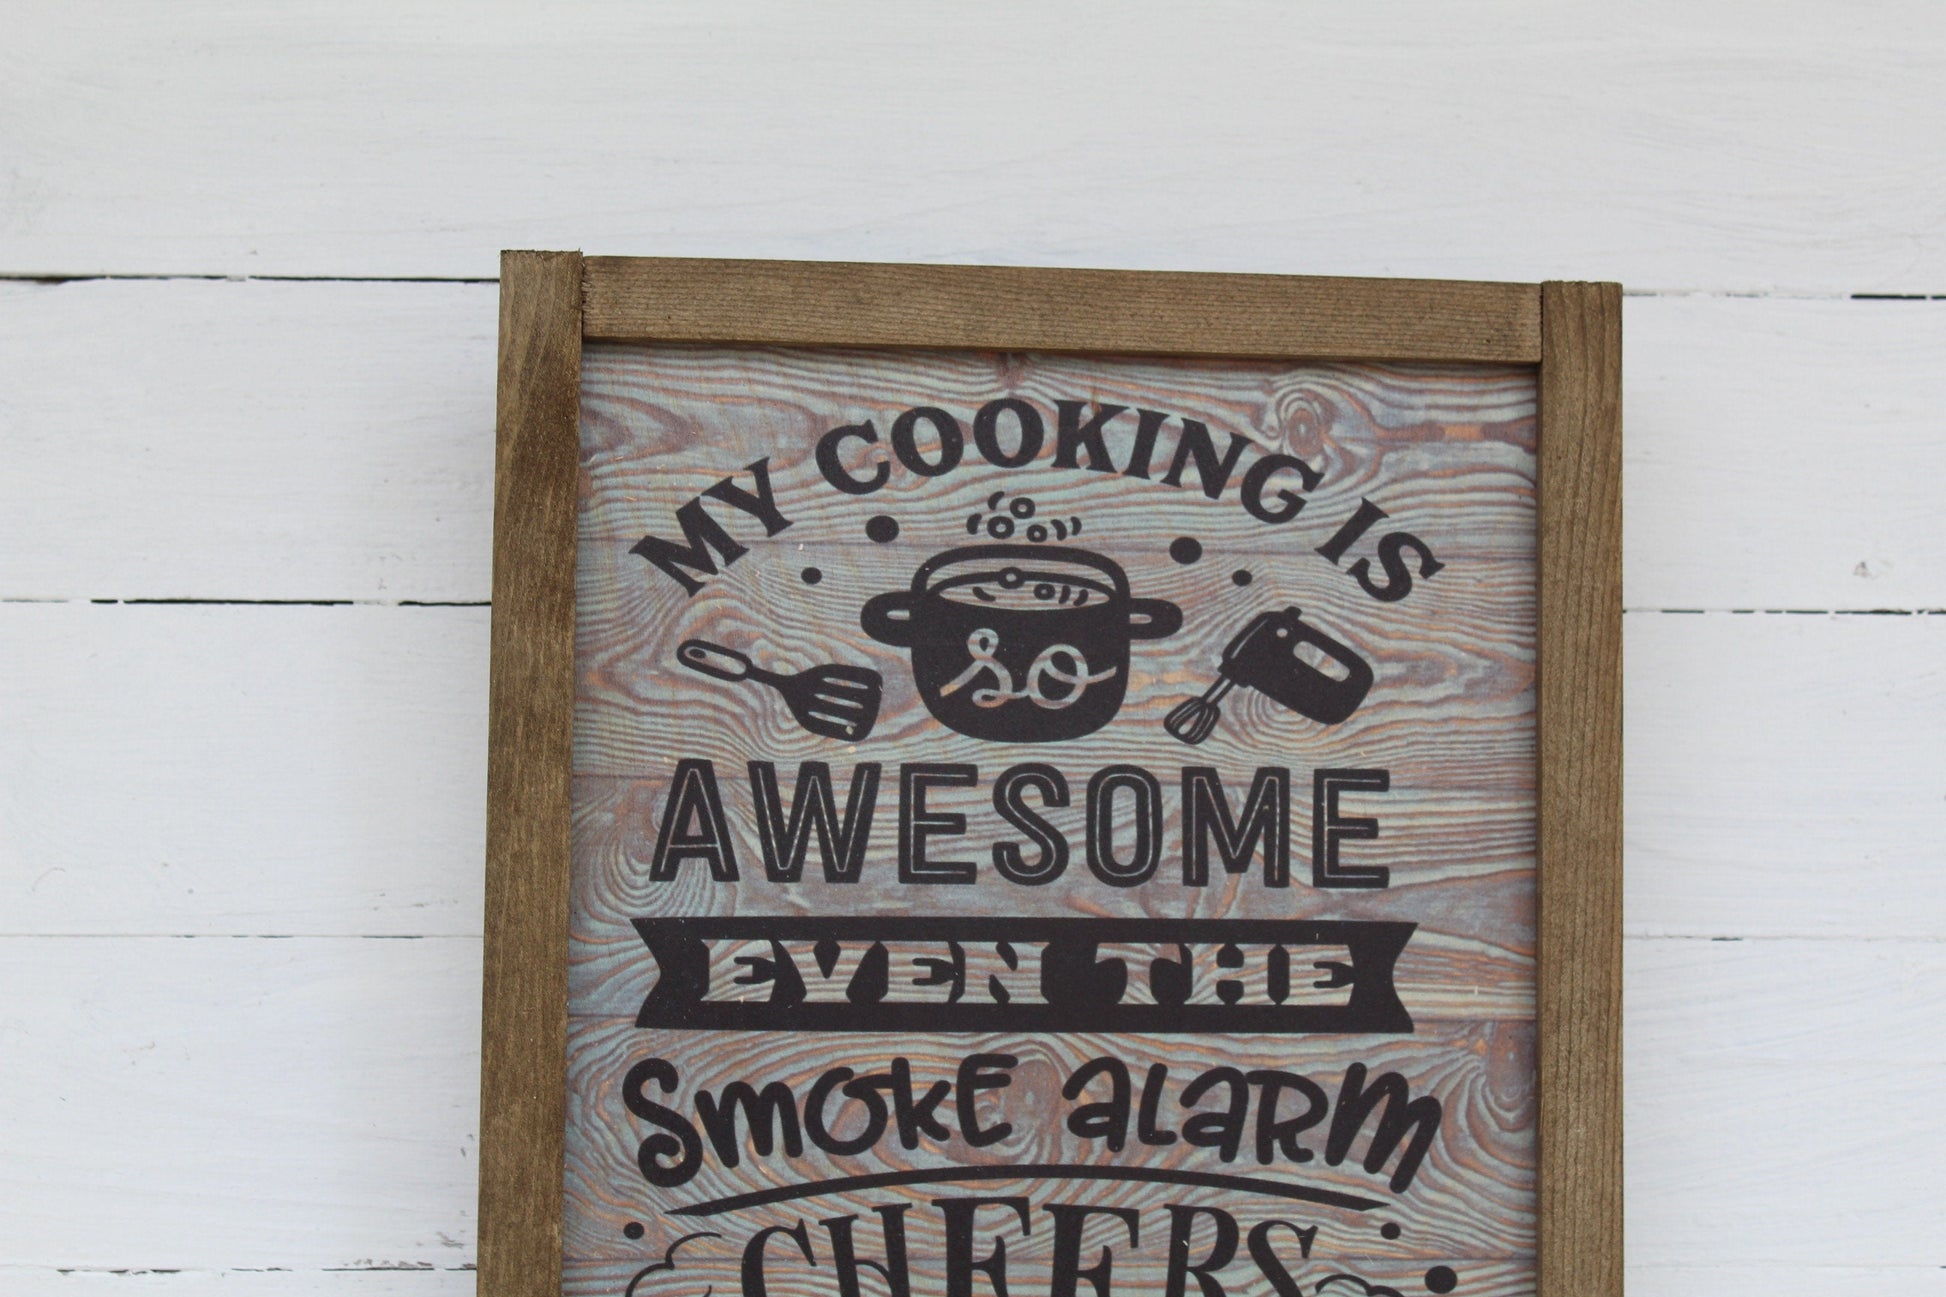 My Cooking Is Awesome Smoke Alarm Cheers Me On Funny Kitchen Sign Farmhouse Rustic Barn Wood Decoration Joke Silly Can't Cook Gift Text